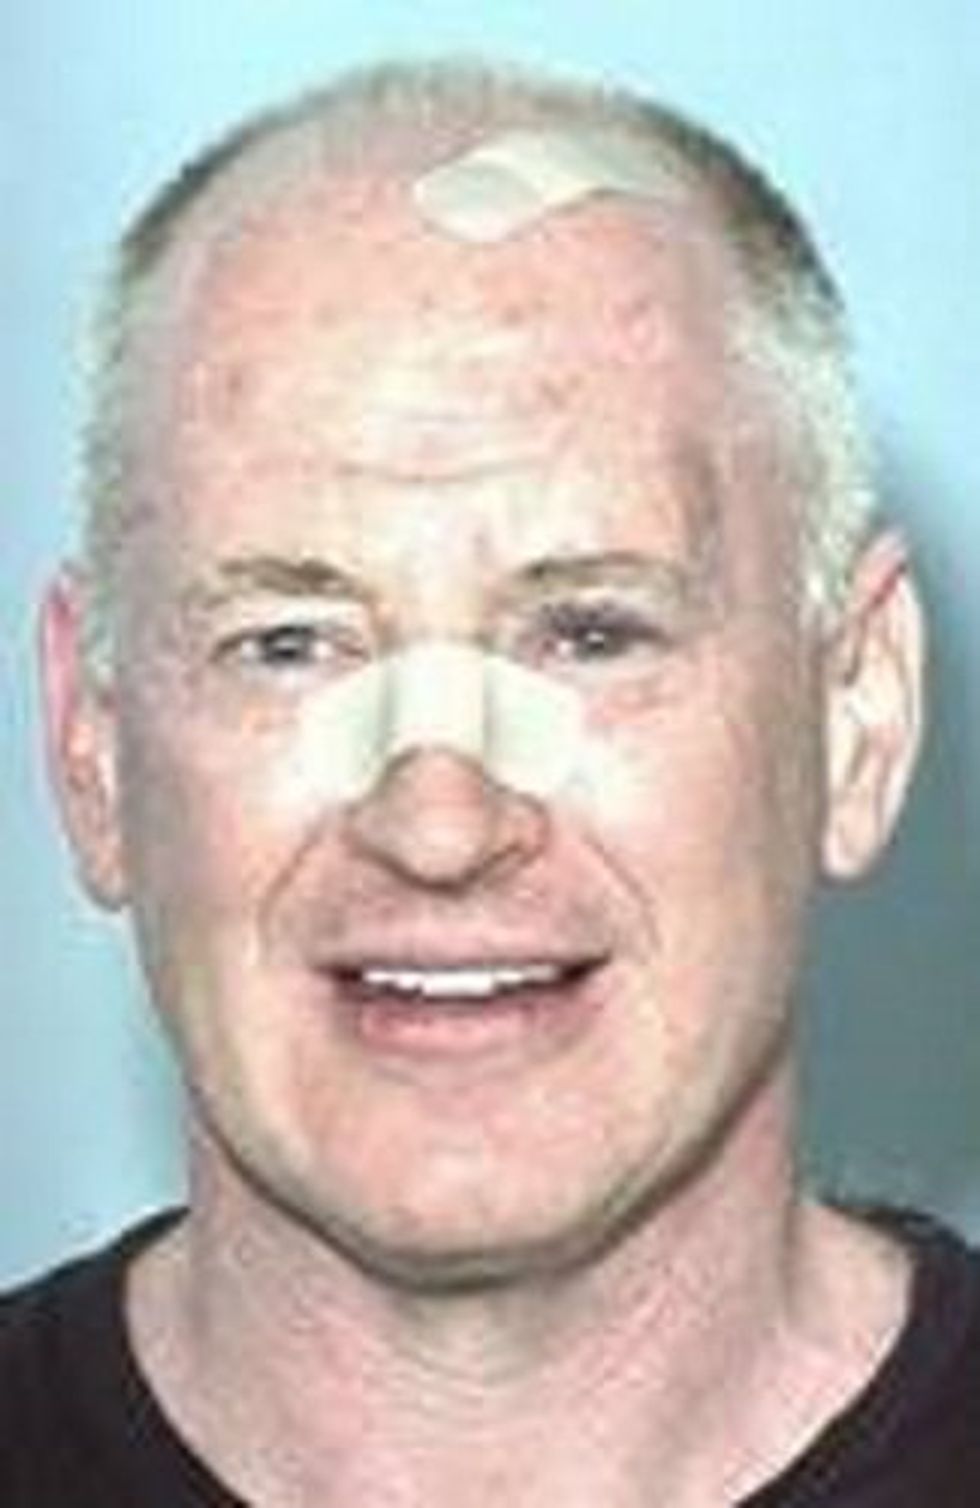 A Texas Billionaire, The Stripper He Beat Up, And The Mugshot He Doesn't Want You To See